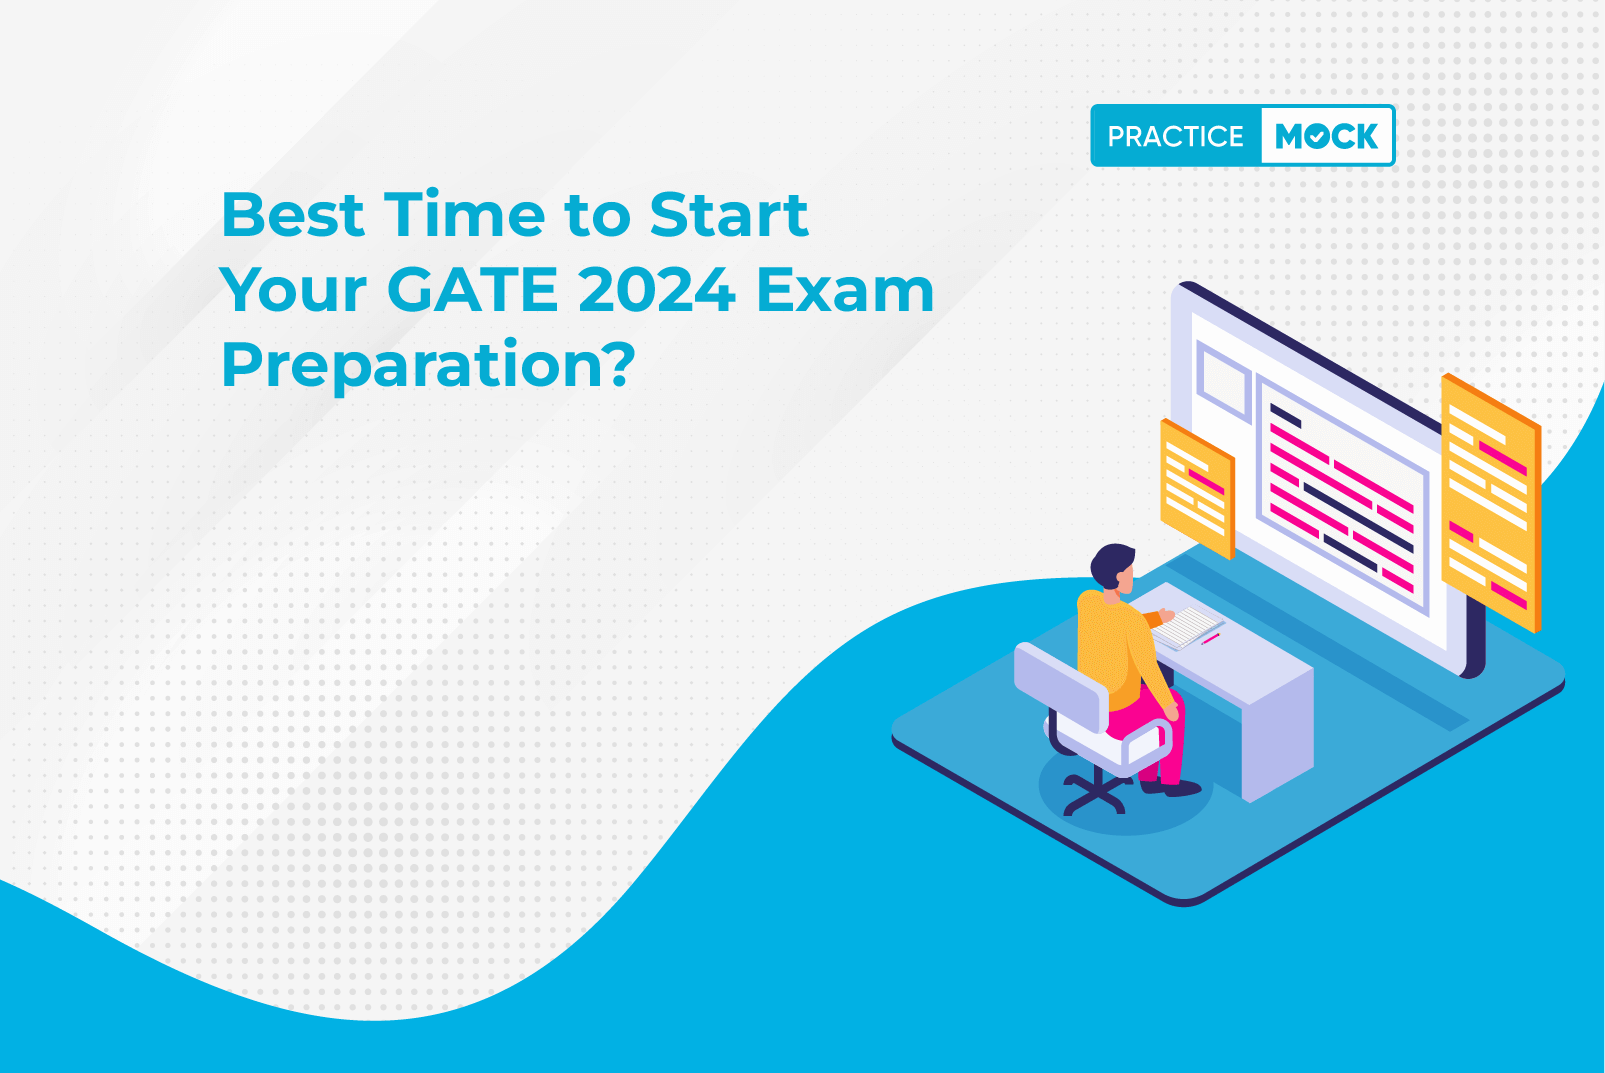 GATE 2024 Preparation Timetable - How to Prepare Perfect Study Plan